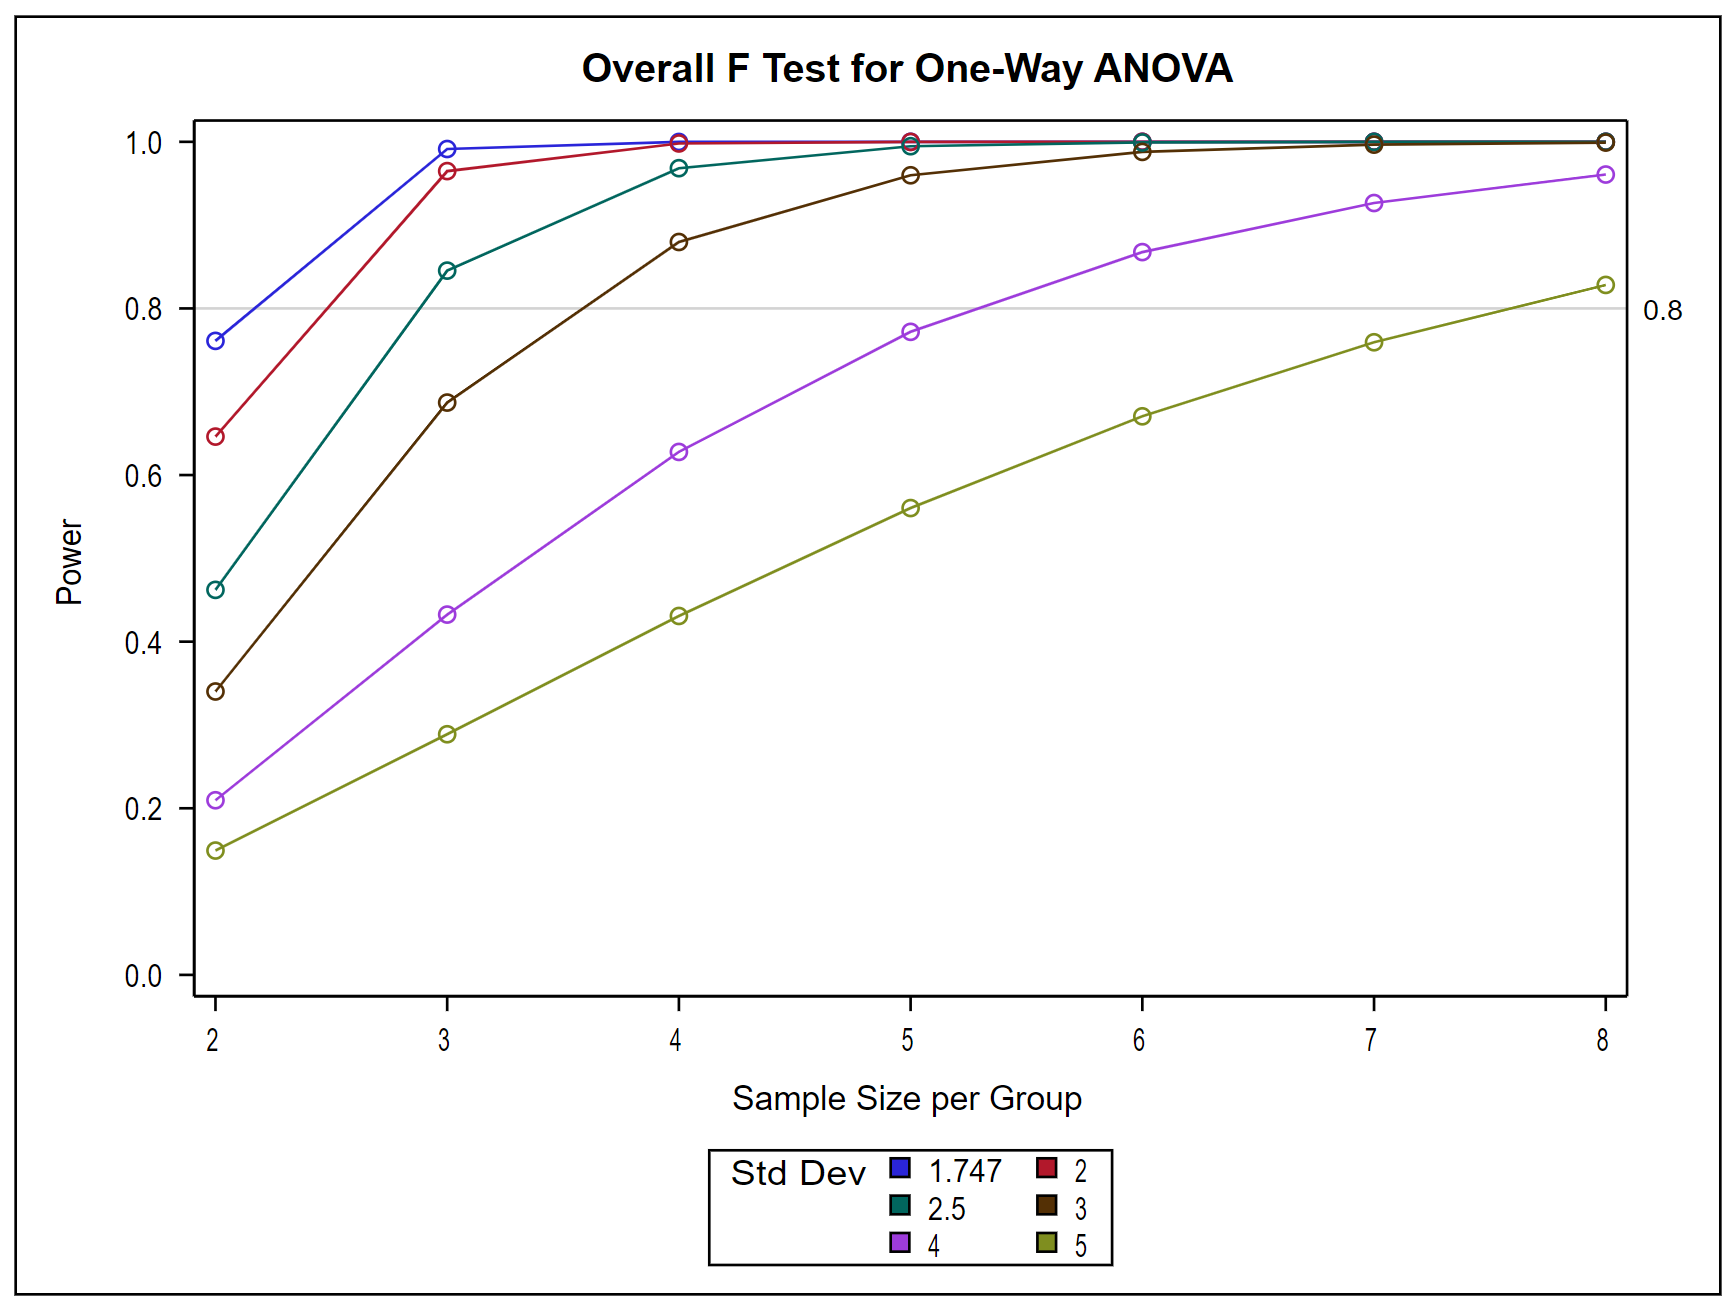 Plot of overall F-test for one-way ANOVA, showing power vs sample size per group.